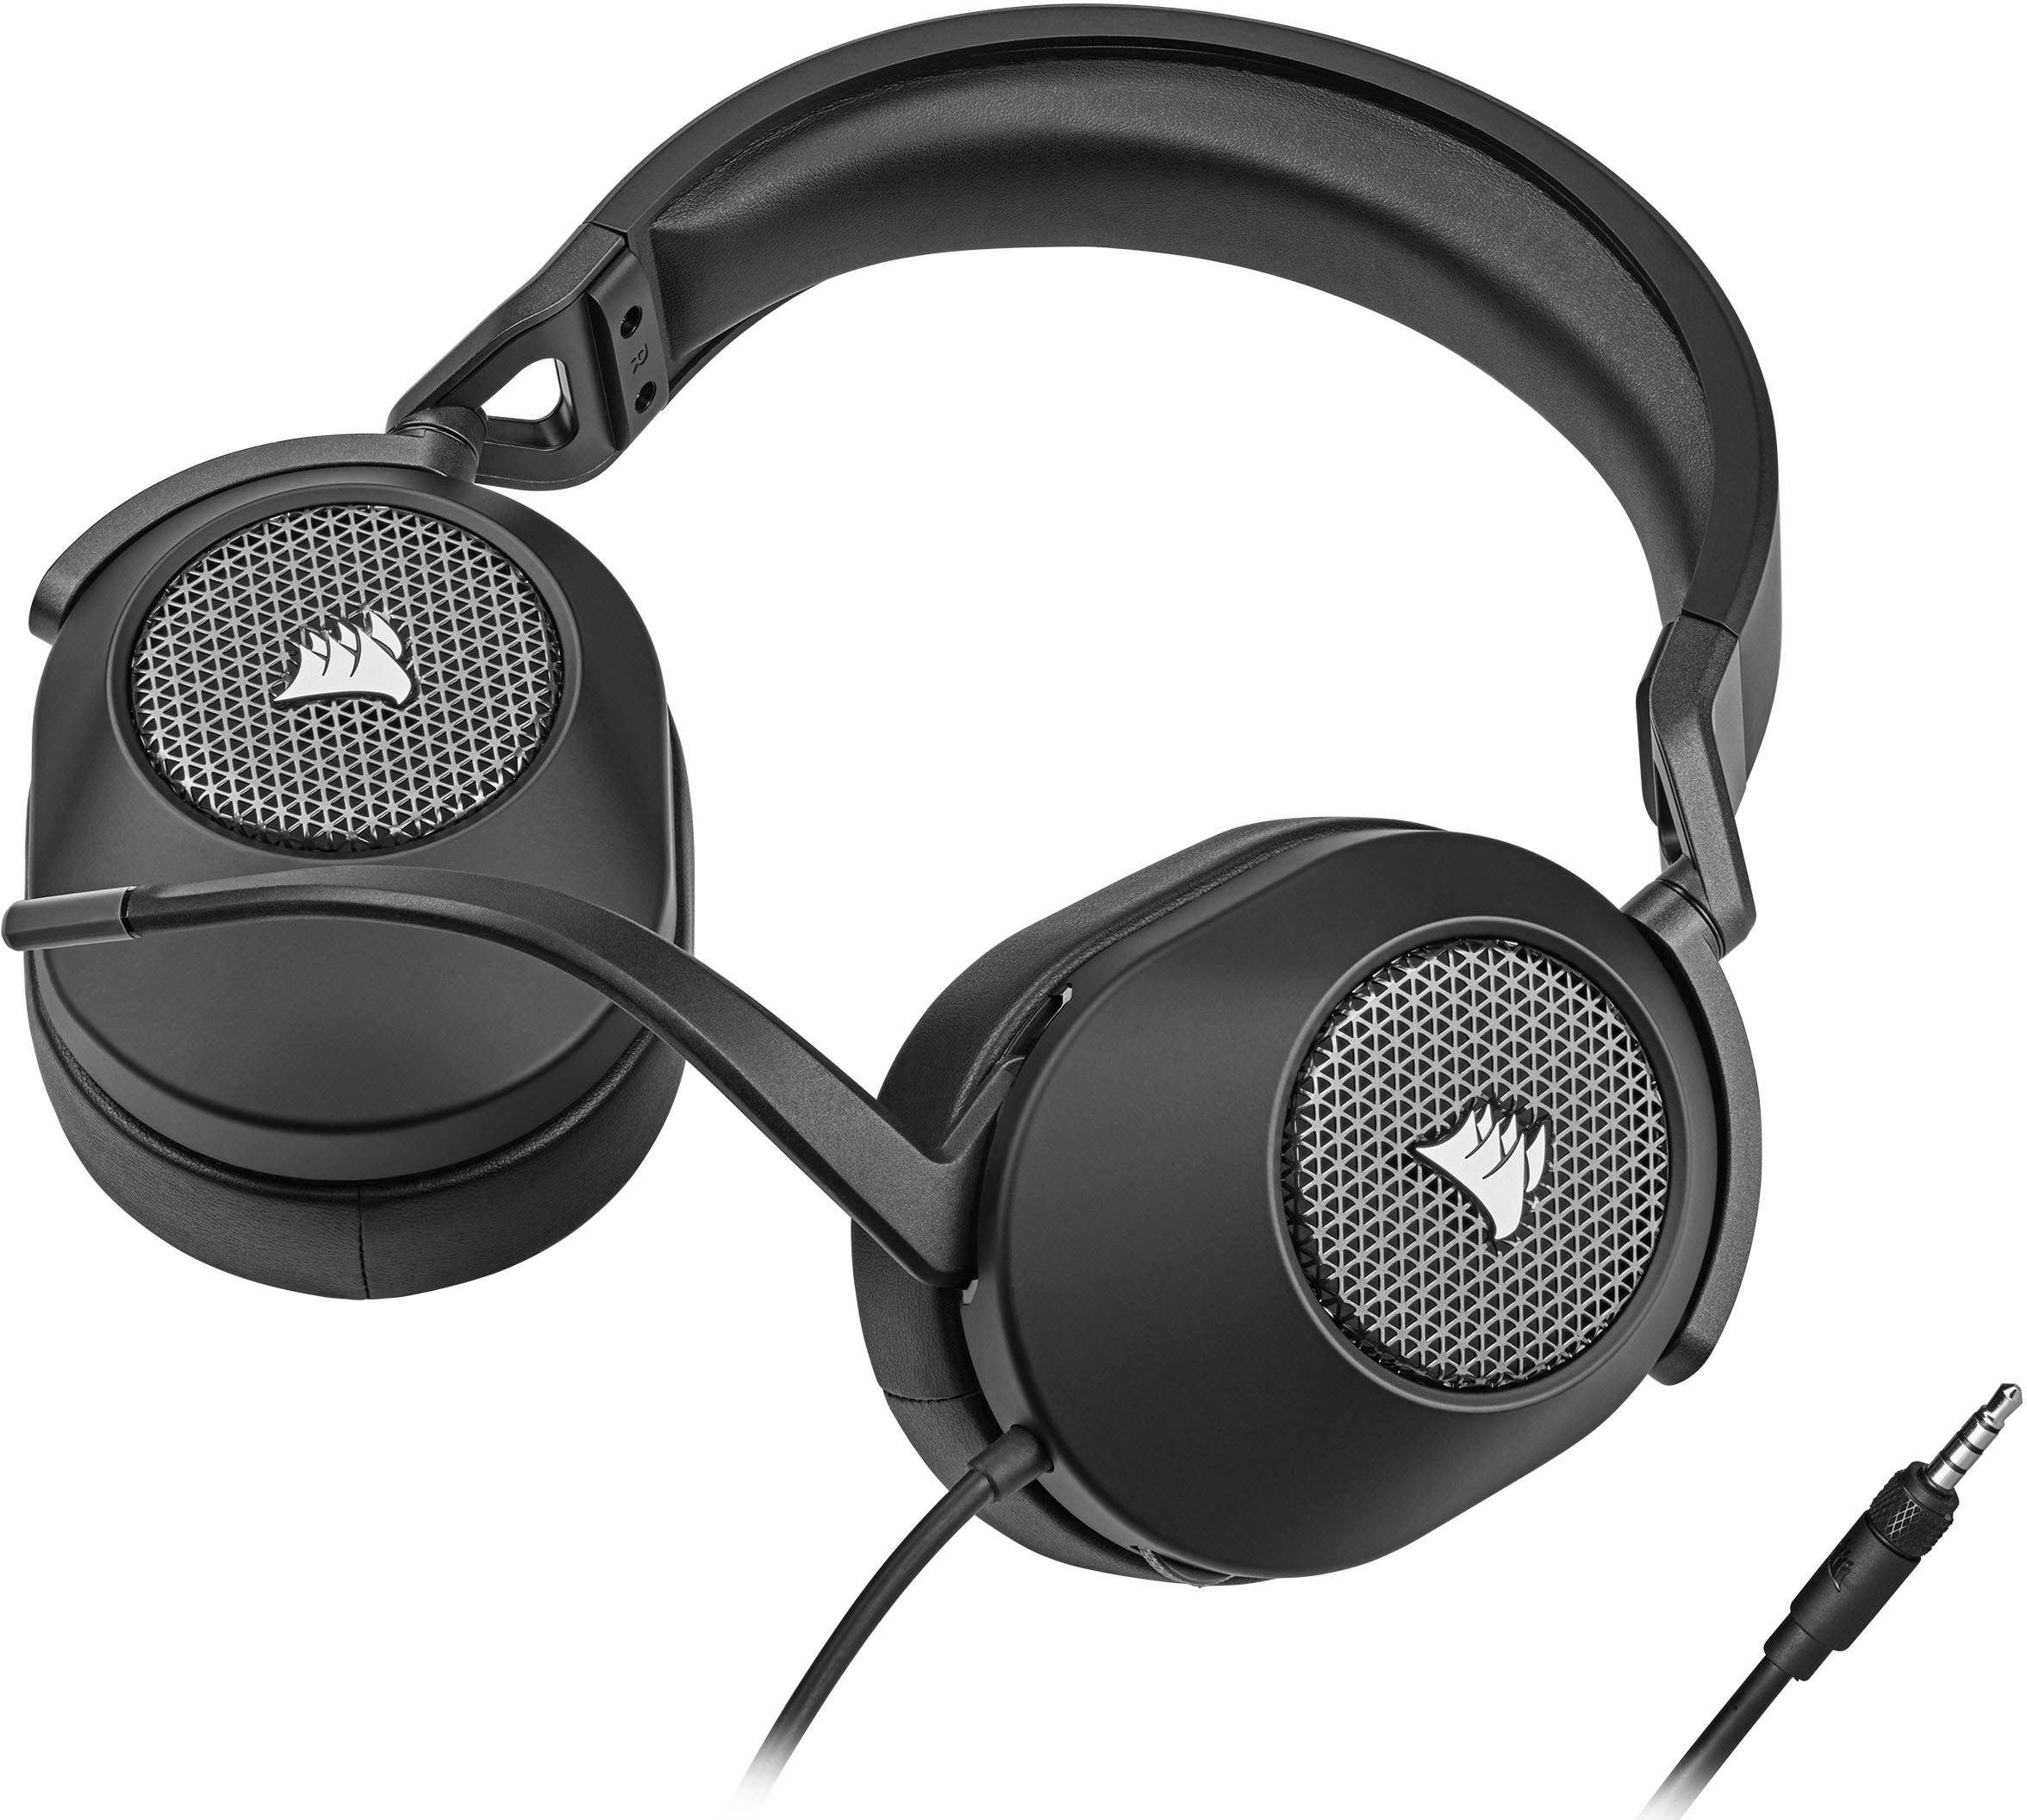 CORSAIR HS65 SURROUND for CA-9011270-NA - Gaming PC, PS4 PS5, Wired Headset and Best Buy Black